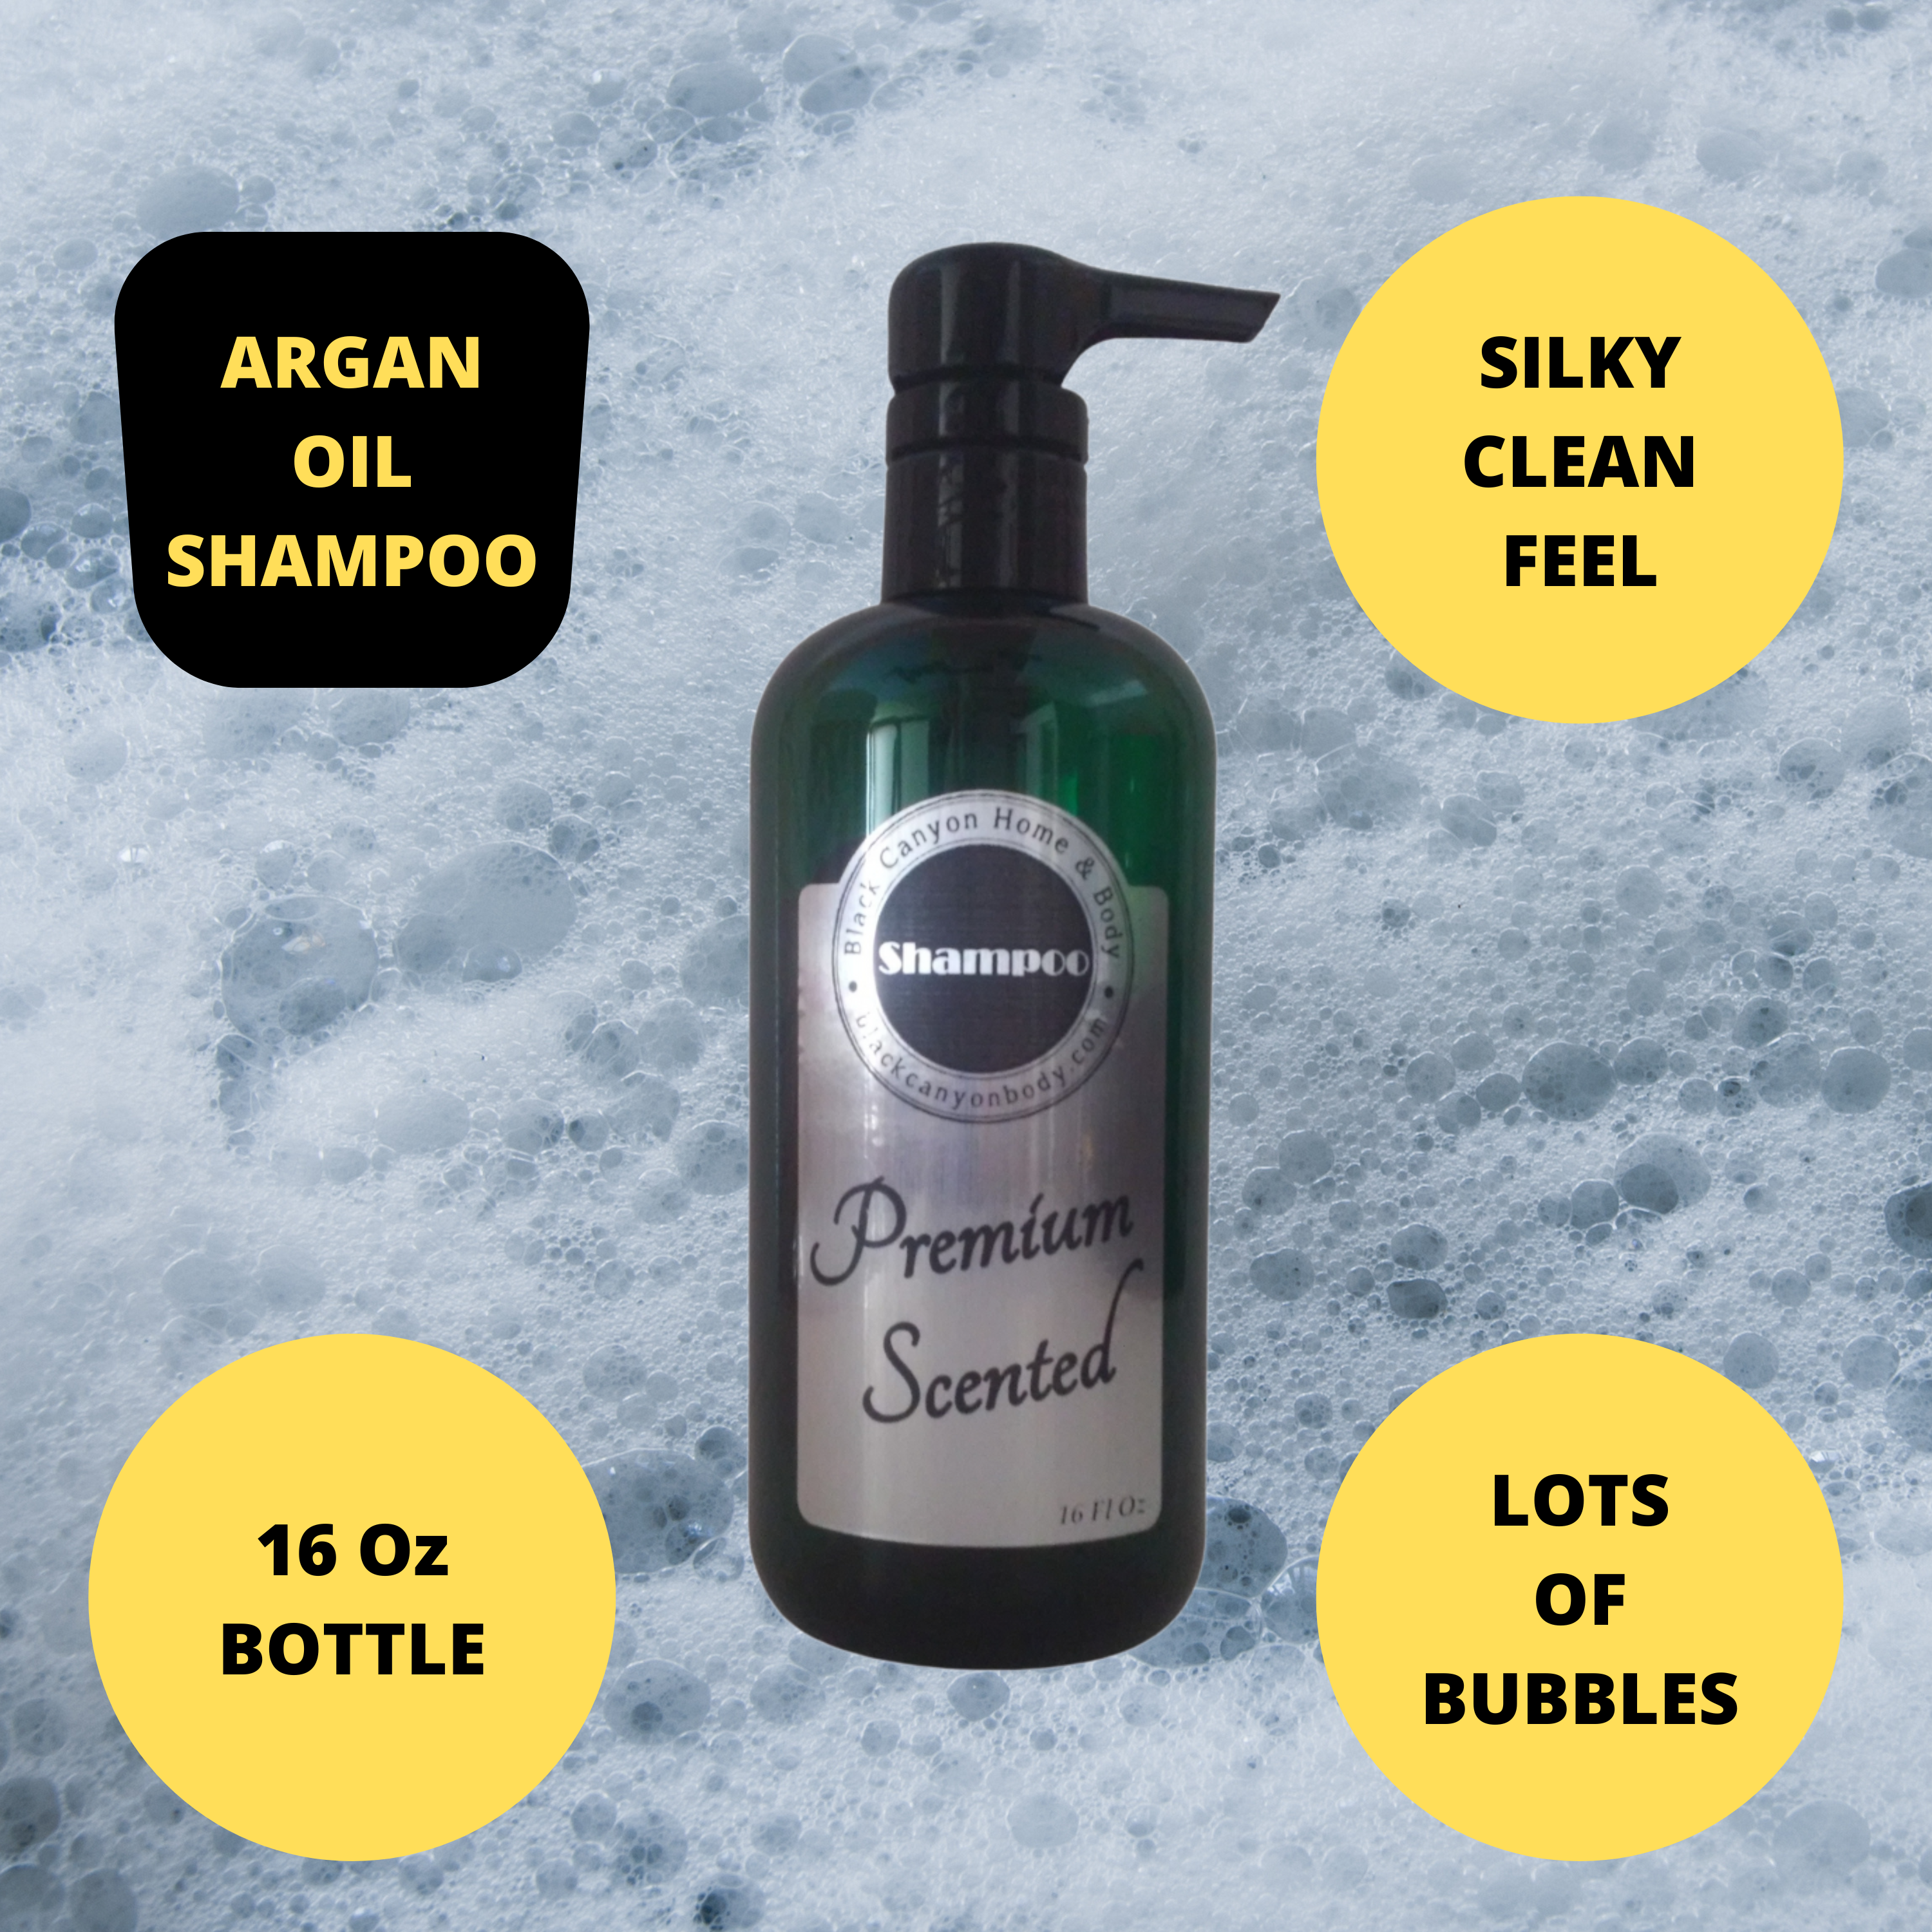 Black Canyon Coconut Lemongrass Scented Shampoo with Argan Oil